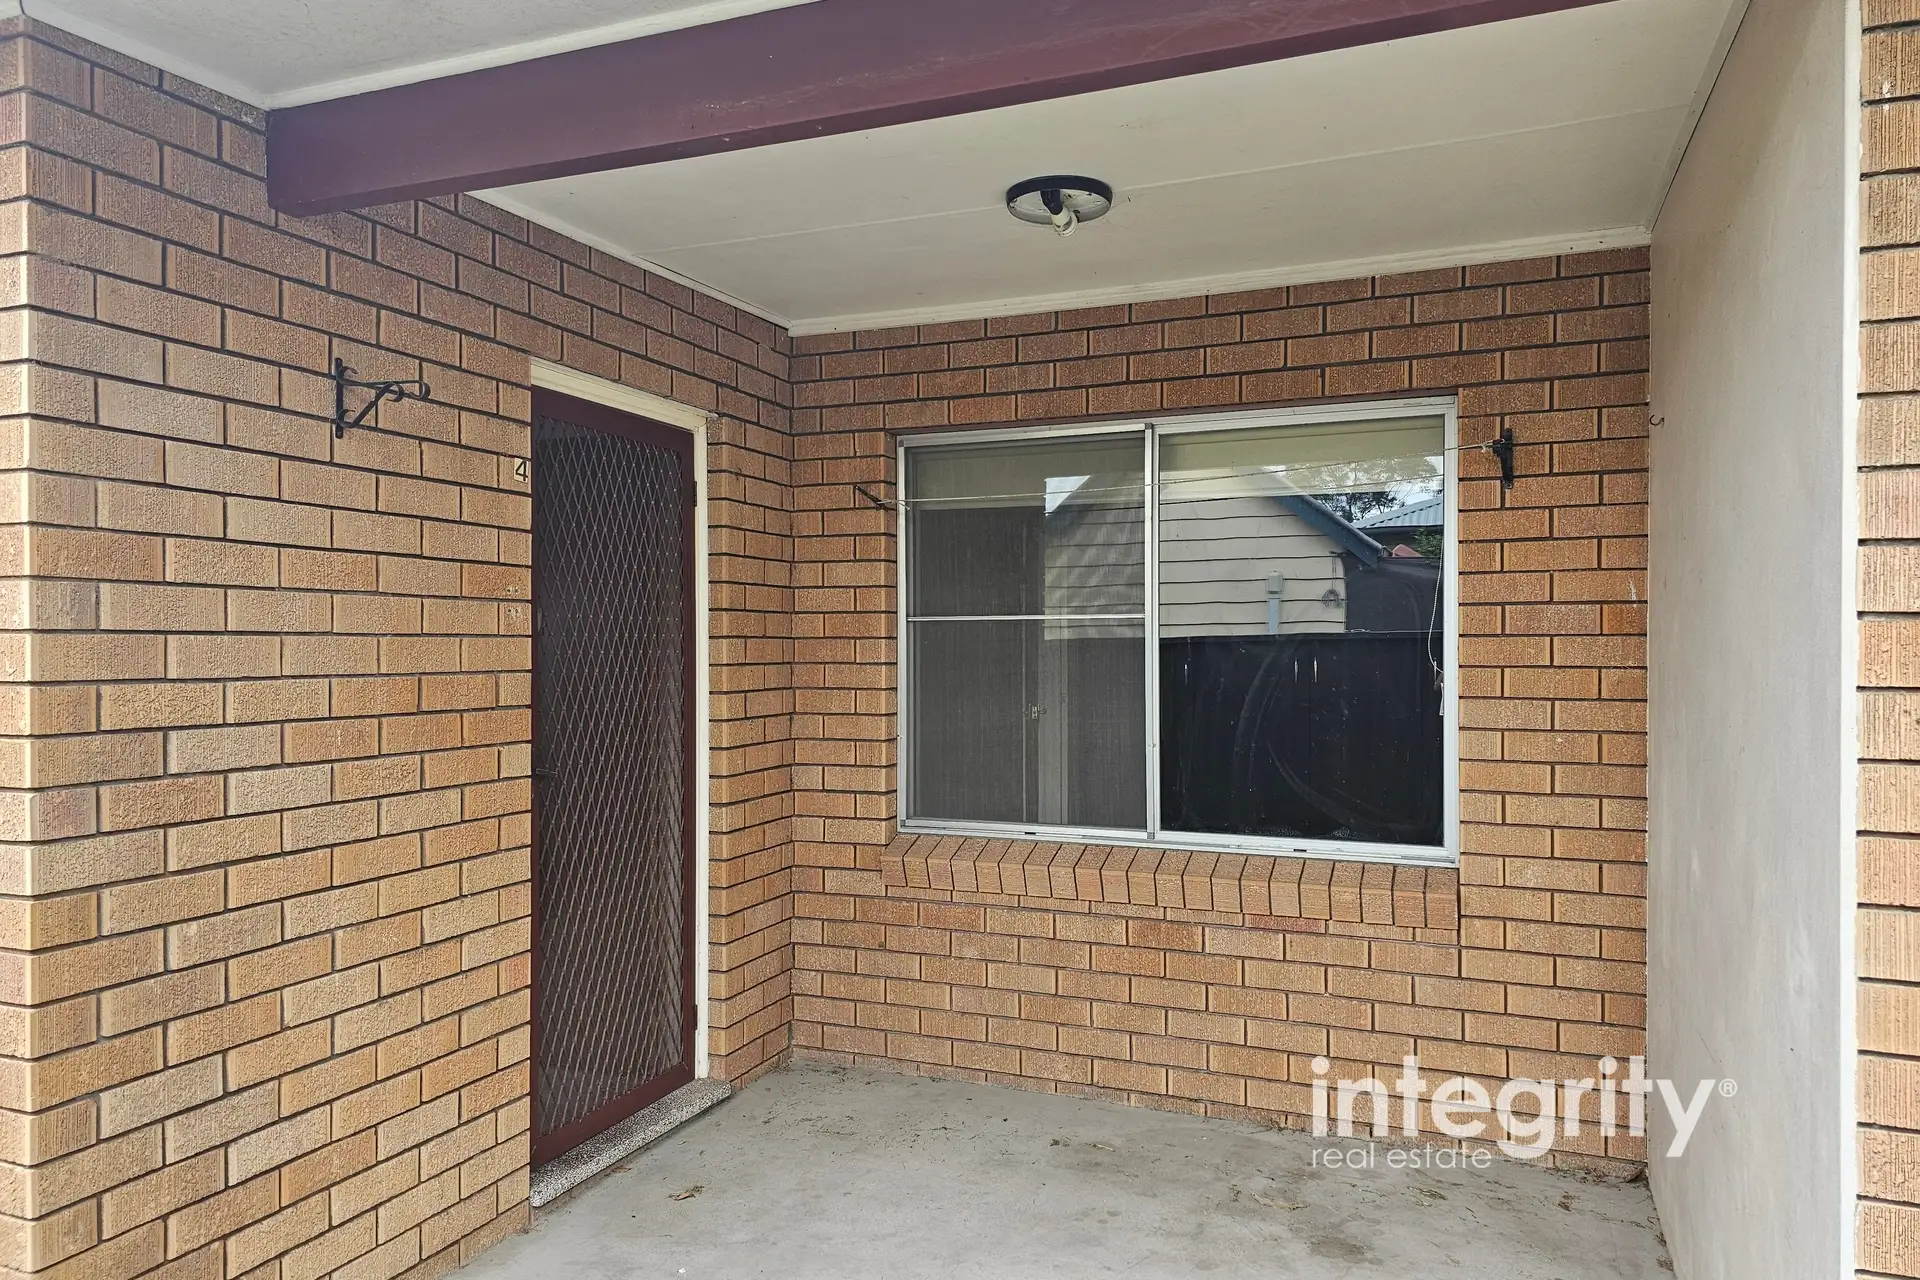 4/32 Birriley Street, Bomaderry Leased by Integrity Real Estate